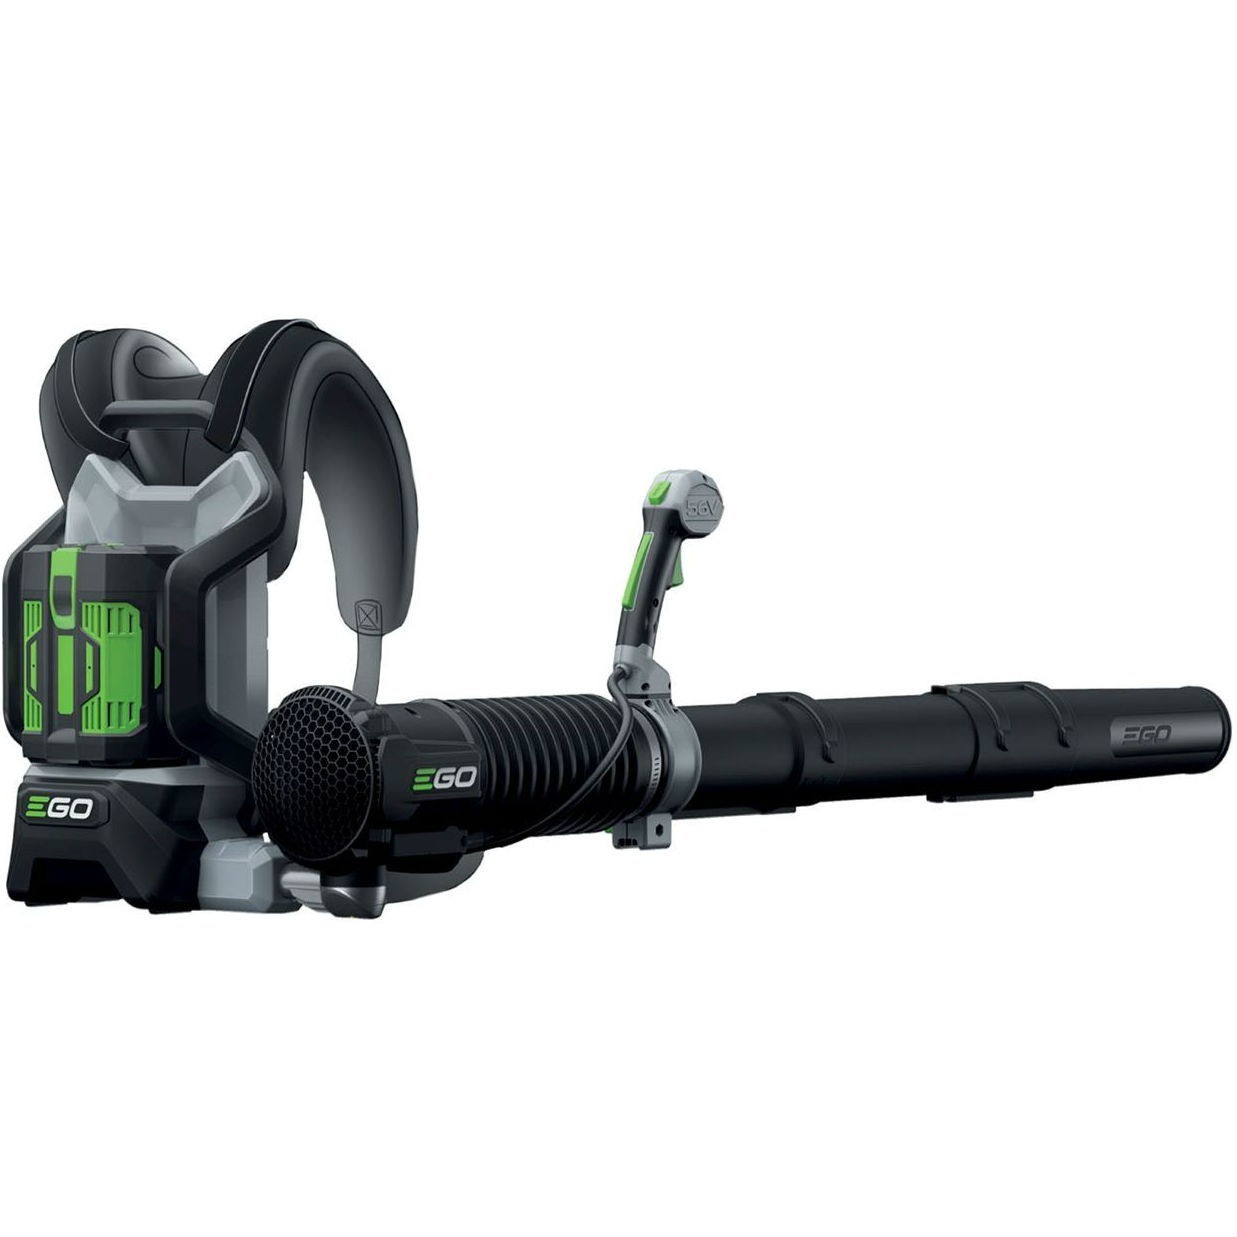 EGO LB6000E Power+ Cordless Backpack Blower (Tool Only)